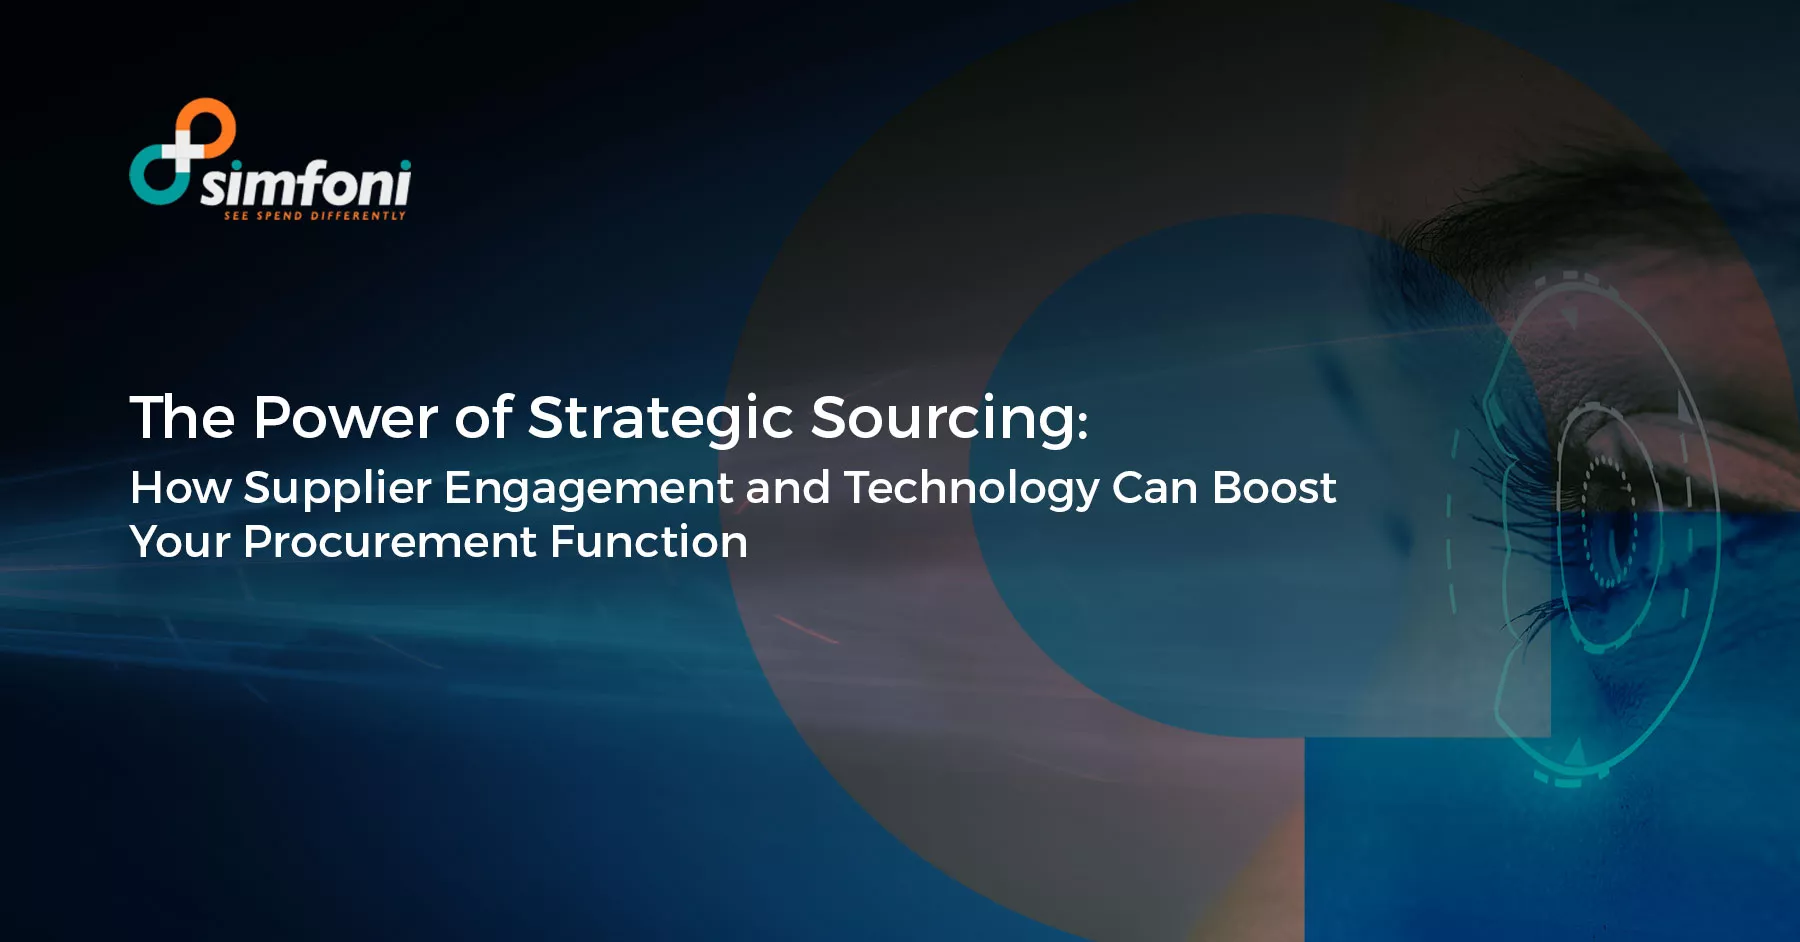 The Power of Strategic Sourcing: How Supplier Engagement and Technology Can Boost Your Procurement Function